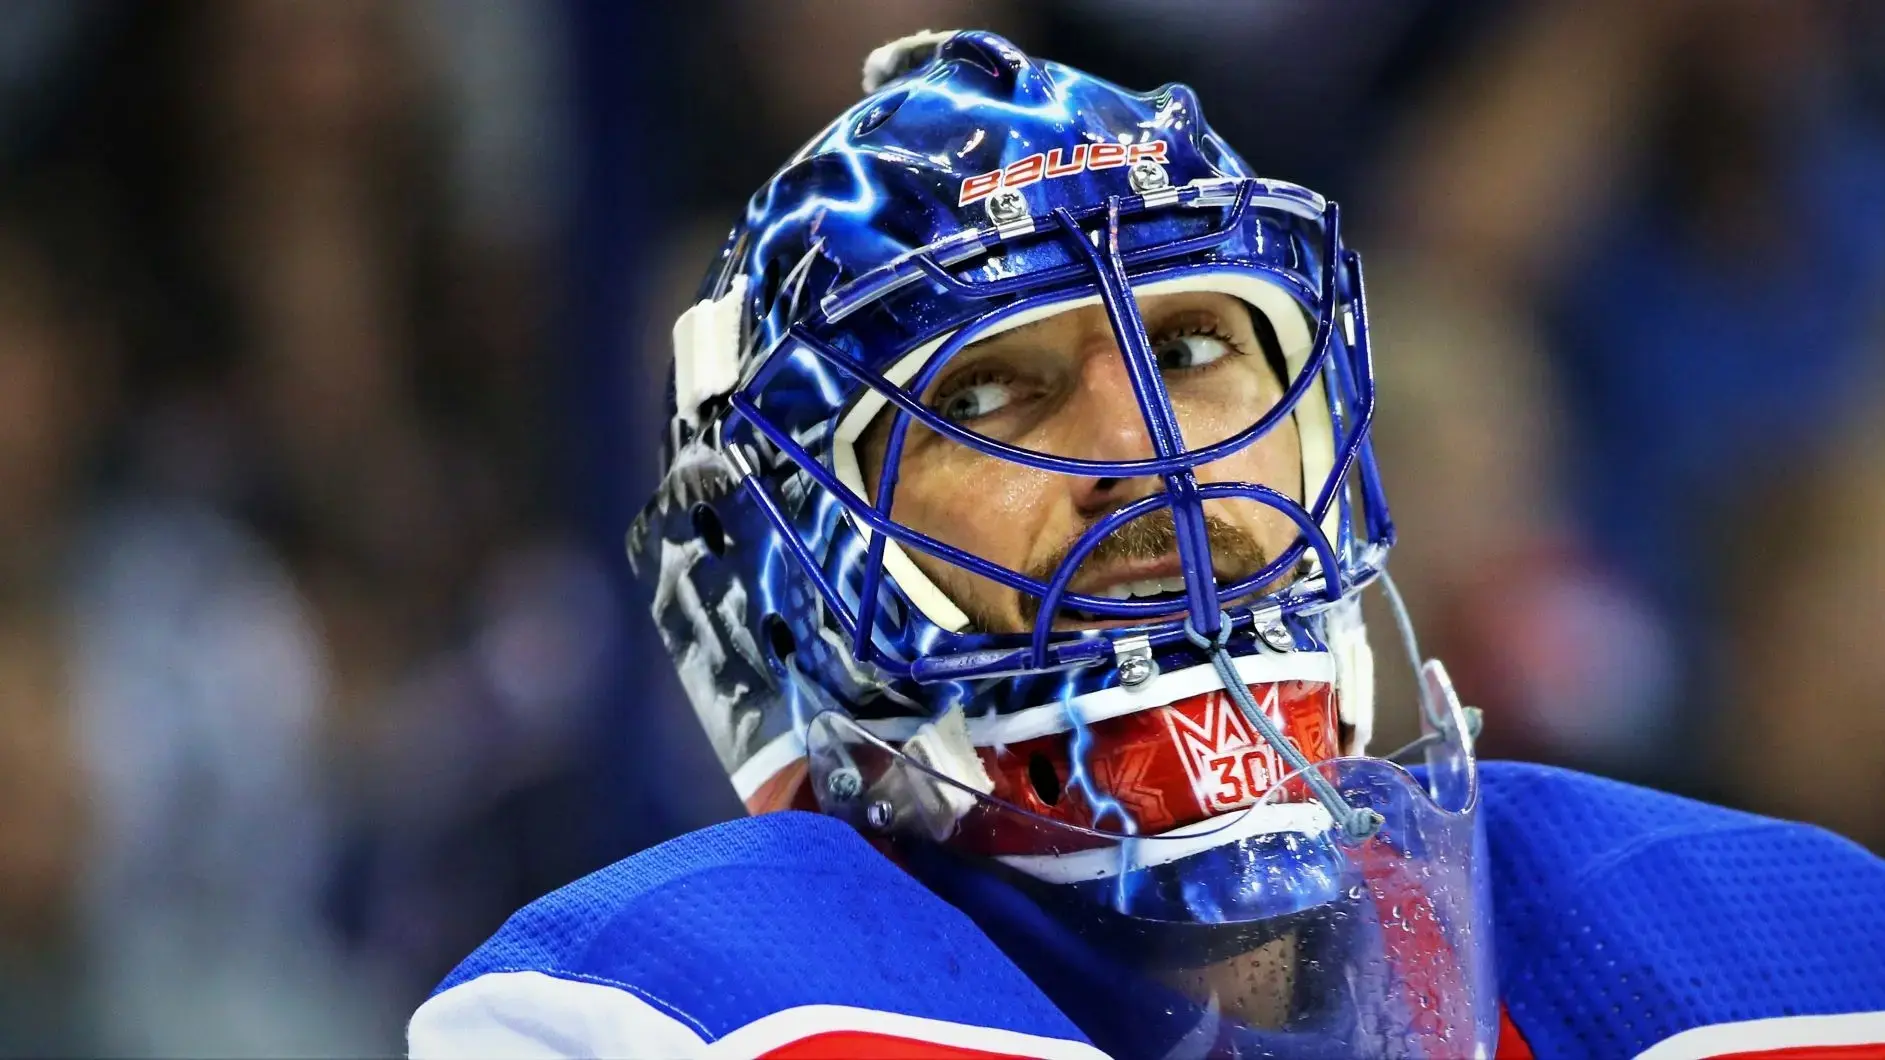 Oct 13, 2017; Columbus, OH, USA; New York Rangers goalie Henrik Lundqvist (30) reacts after making a save against the Columbus Blue Jackets in the second period at Nationwide Arena. Mandatory Credit: Aaron Doster-USA TODAY Sports / © Aaron Doster-USA TODAY Sports